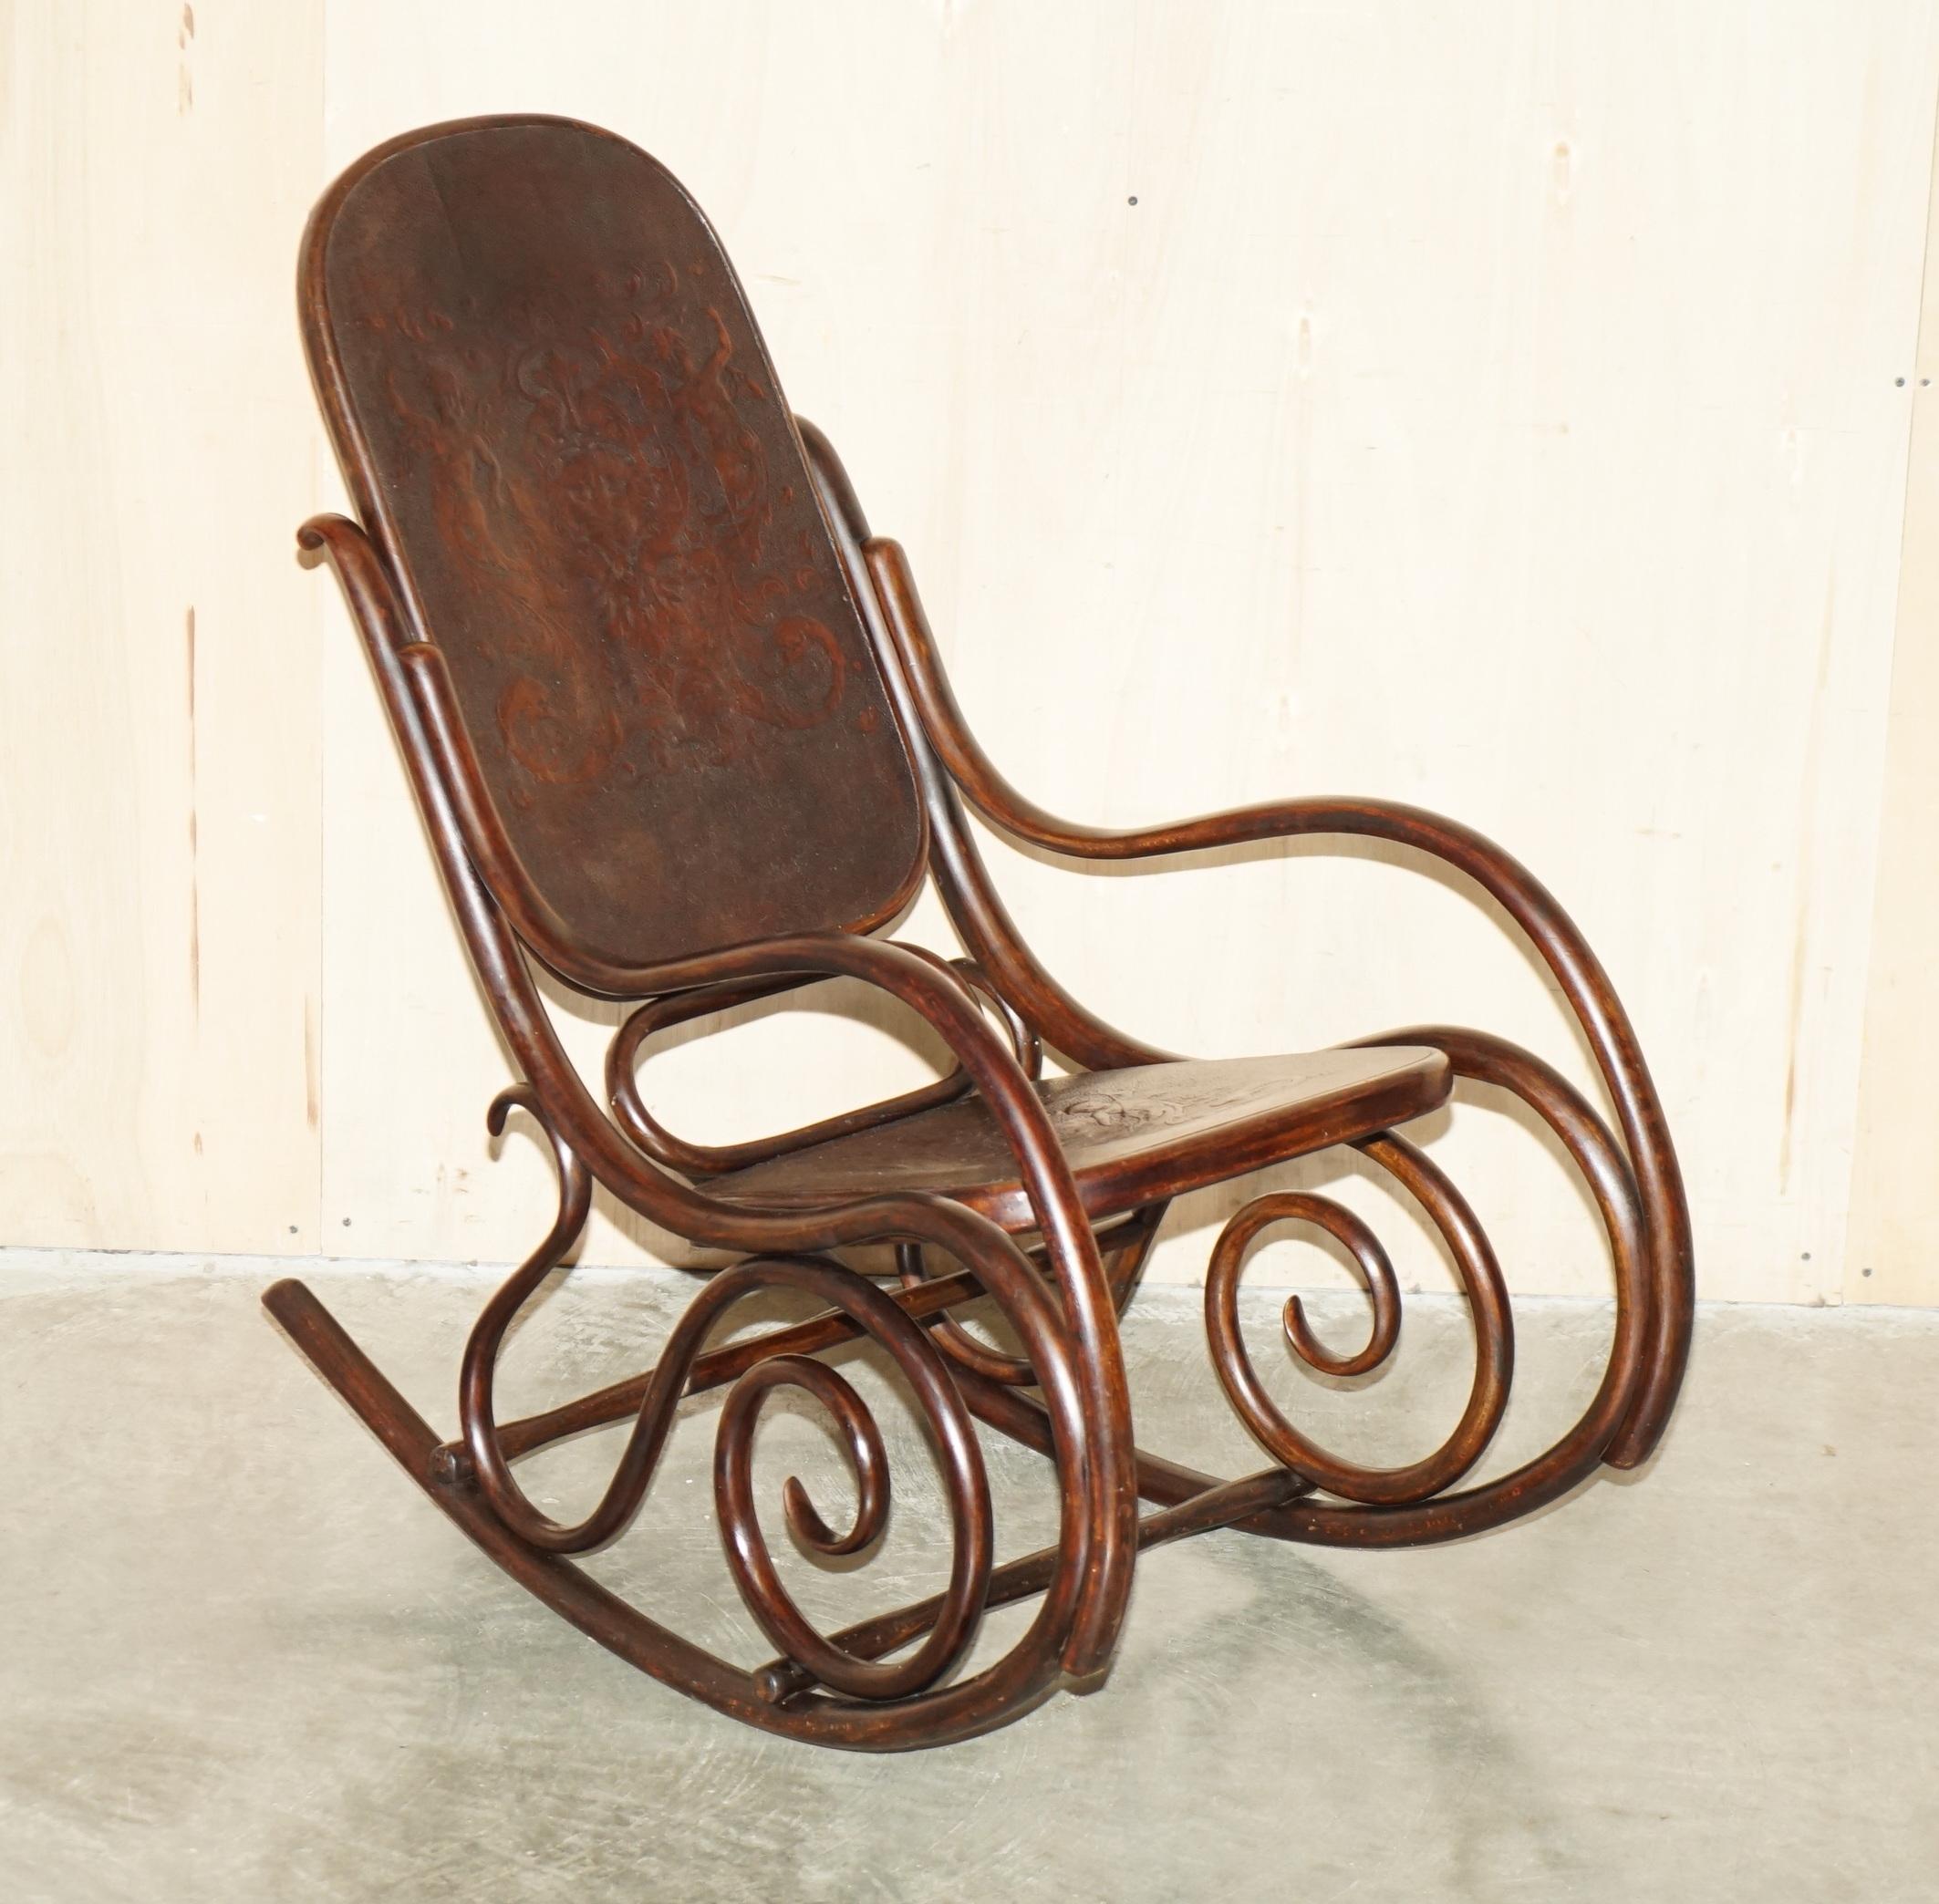 Royal House Antiques

Royal House Antiques is delighted to offer for sale this lovely full sized Antique Victorian Thonet circa 1880 rocking chair with hand carved back and seat panel depicting Cherubs 

Please note the delivery fee listed is just a